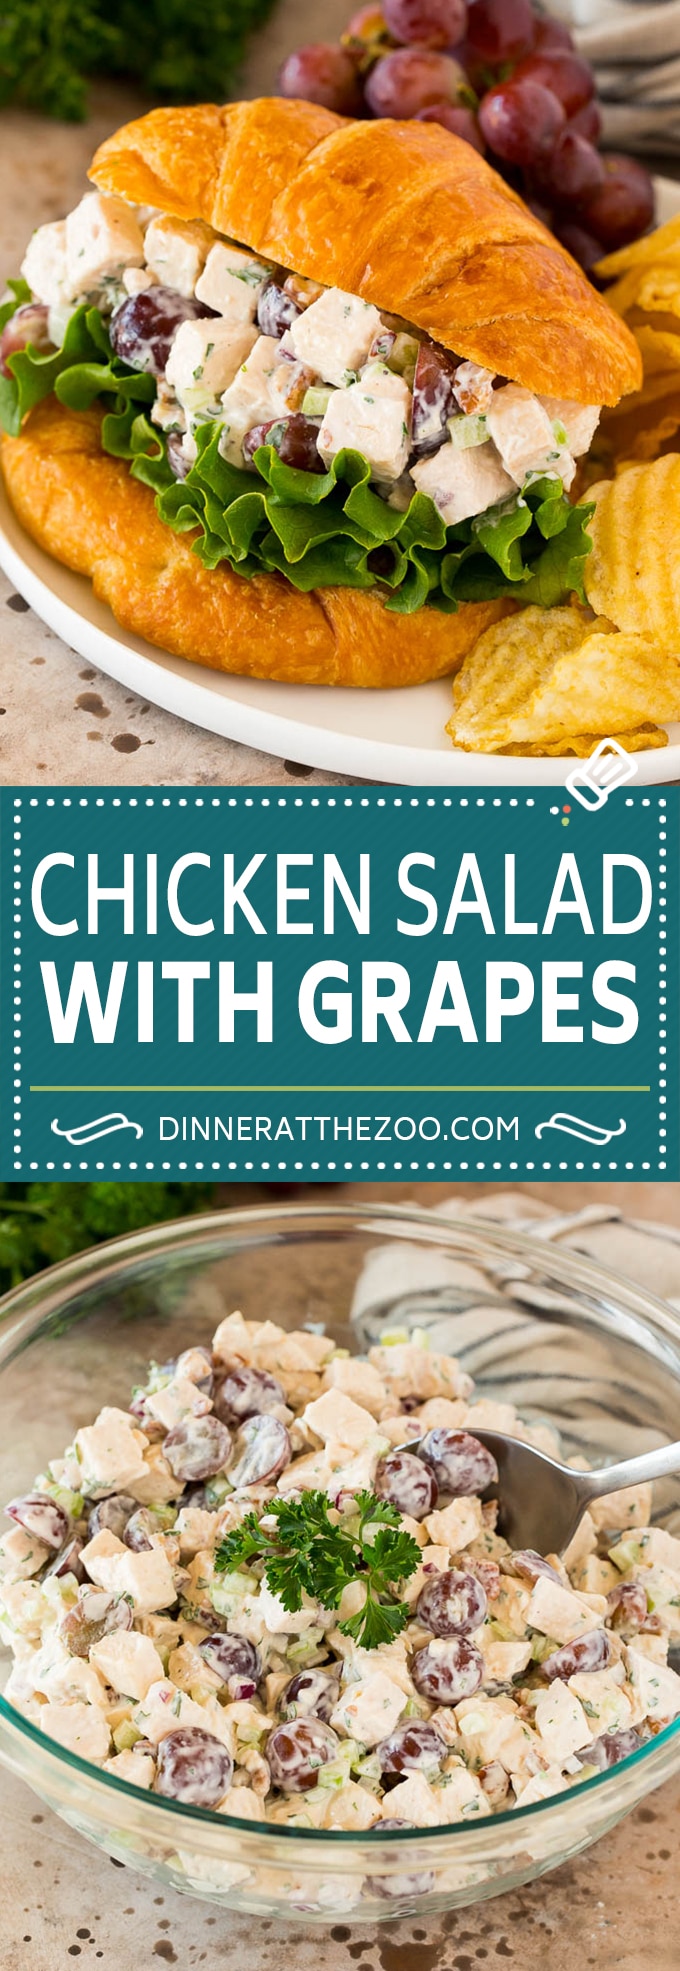 This chicken salad with grapes is a blend of chicken, fresh veggies, pecans and fruit, all tossed together in a creamy dressing.